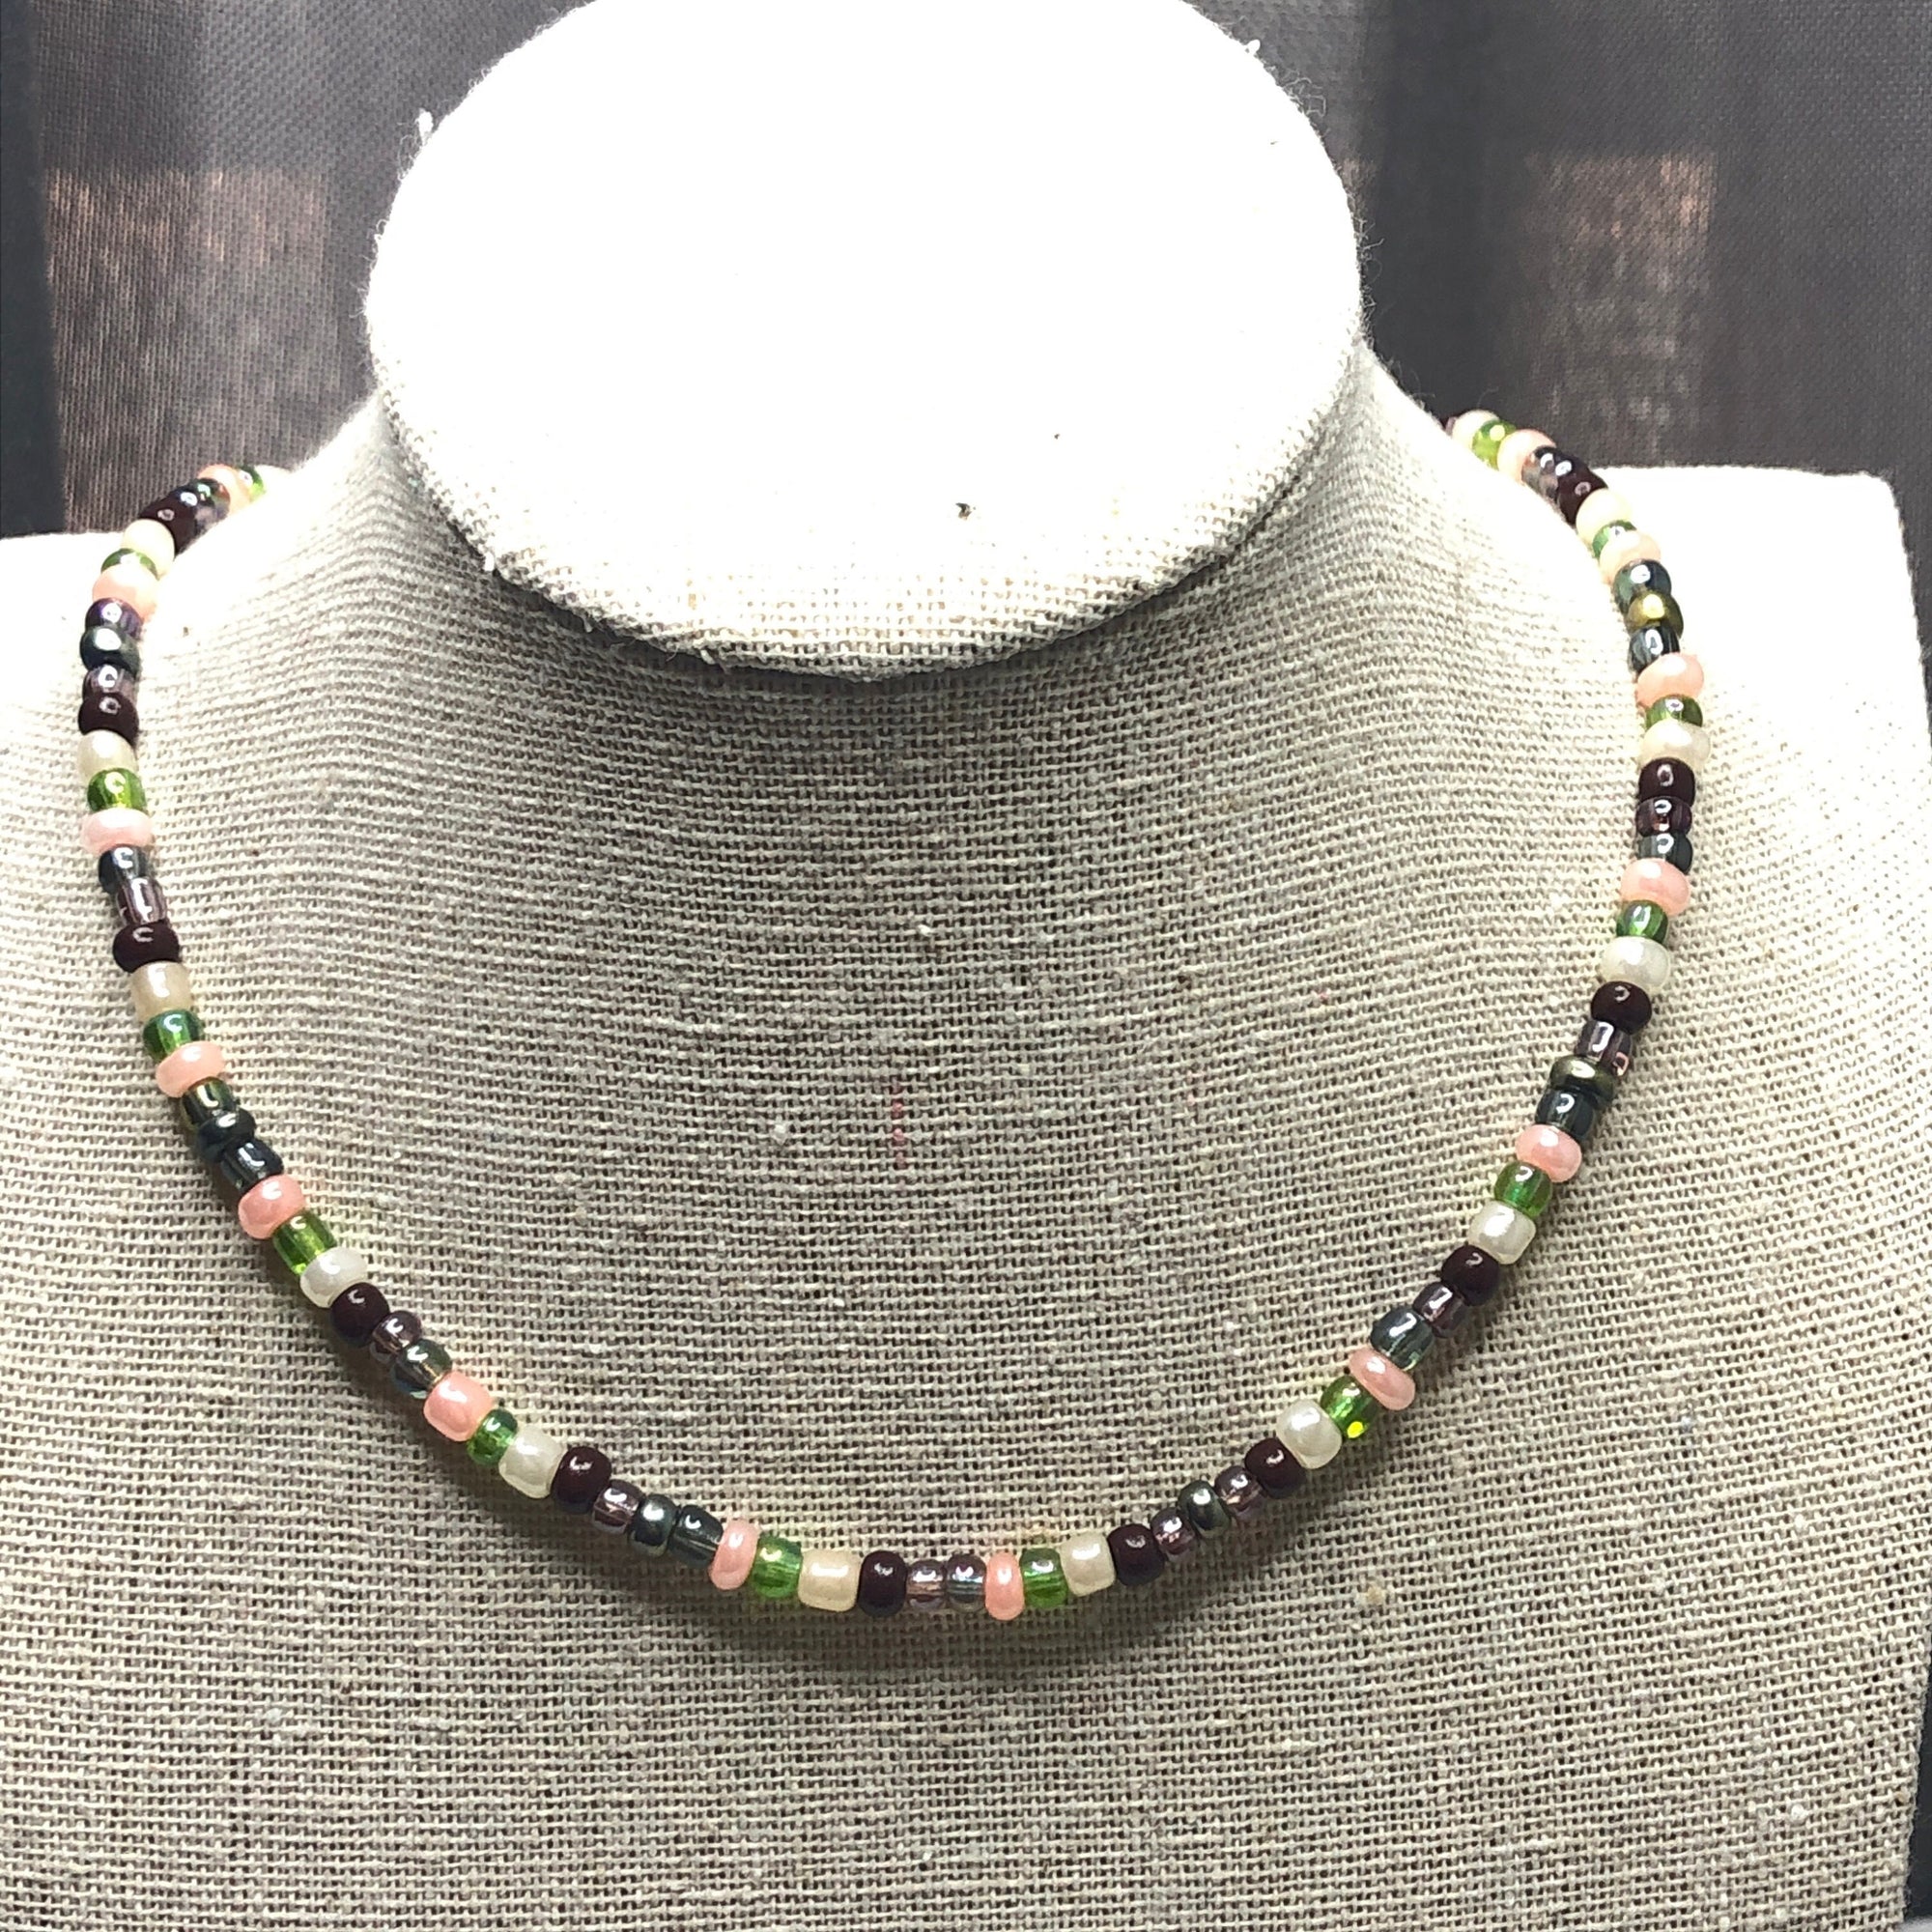 Nature inspired necklace earth tone jewelry • Woodland cottagecore jewelry • Contemporary jewelry minimalist necklace • 48 bead colors!